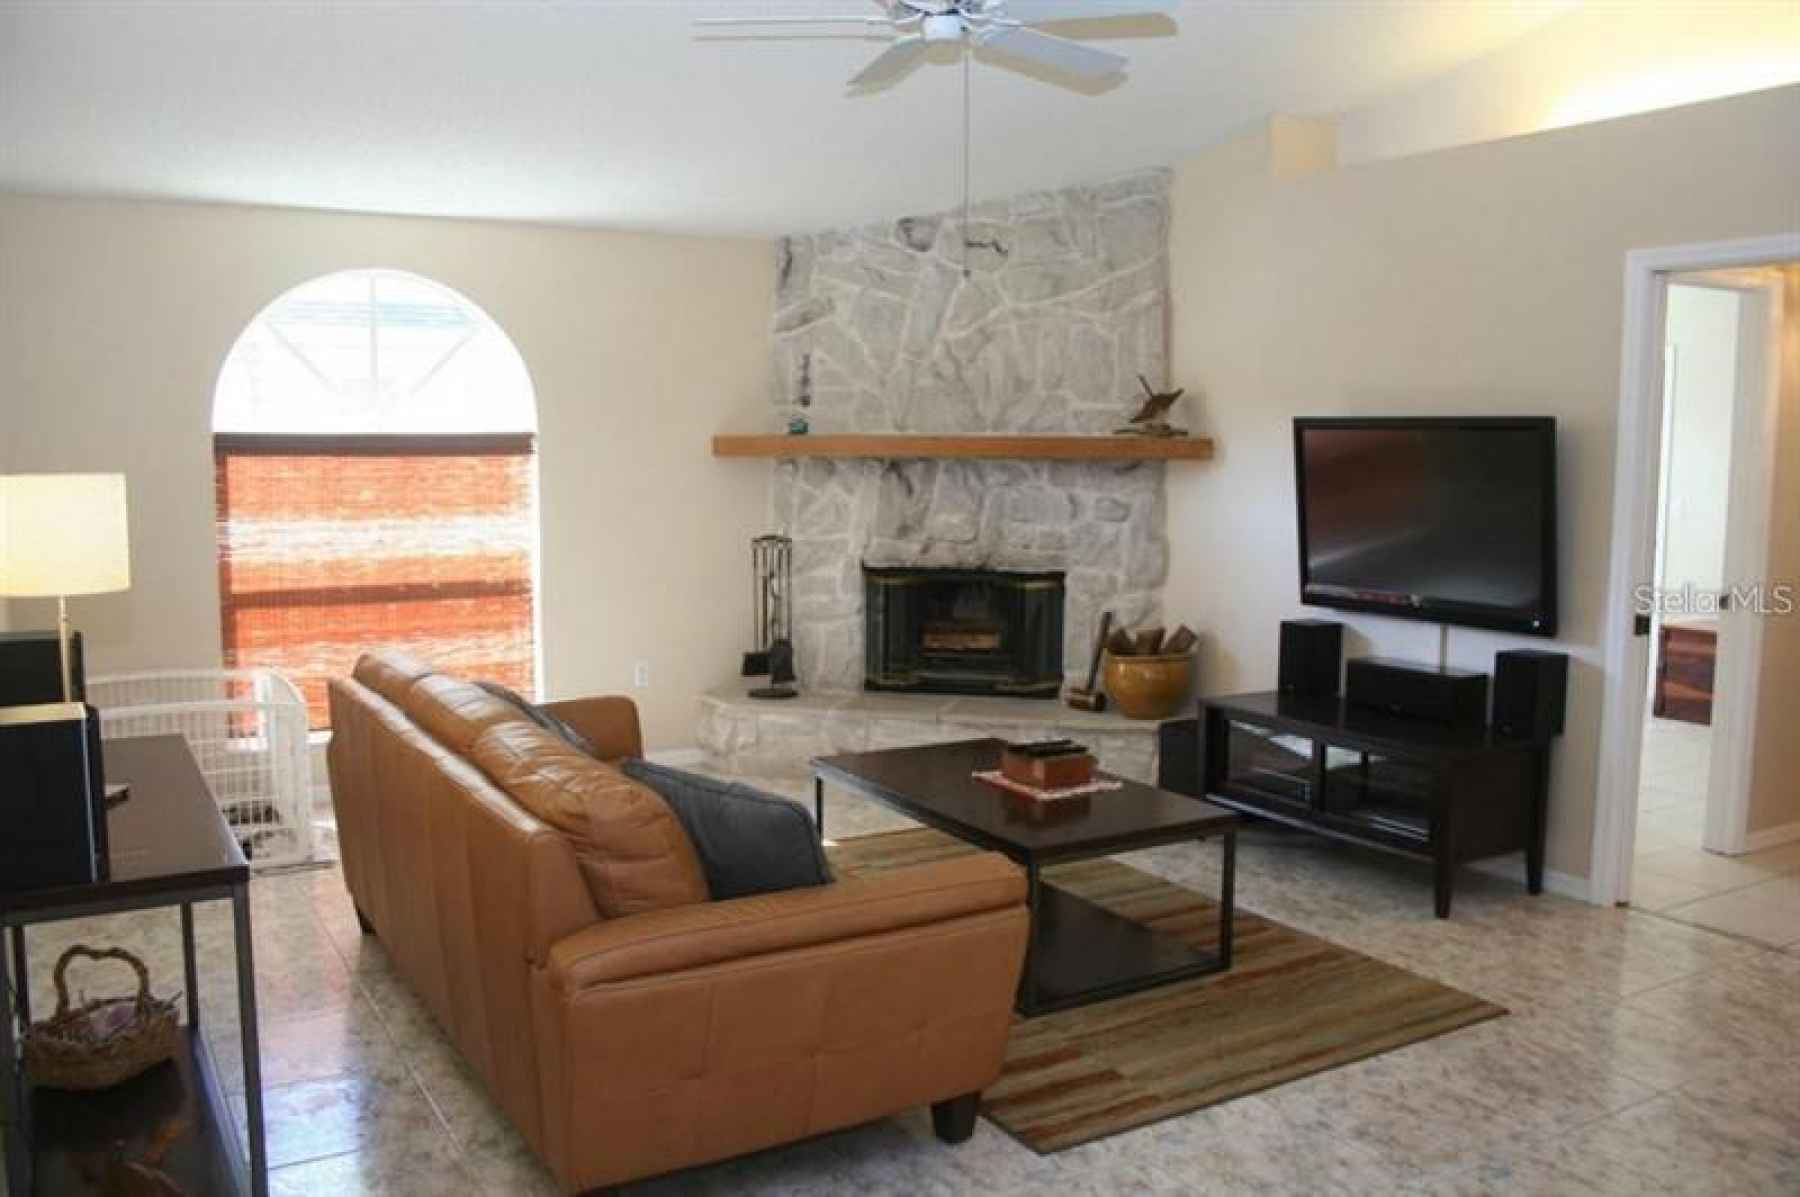 Family room with furniture